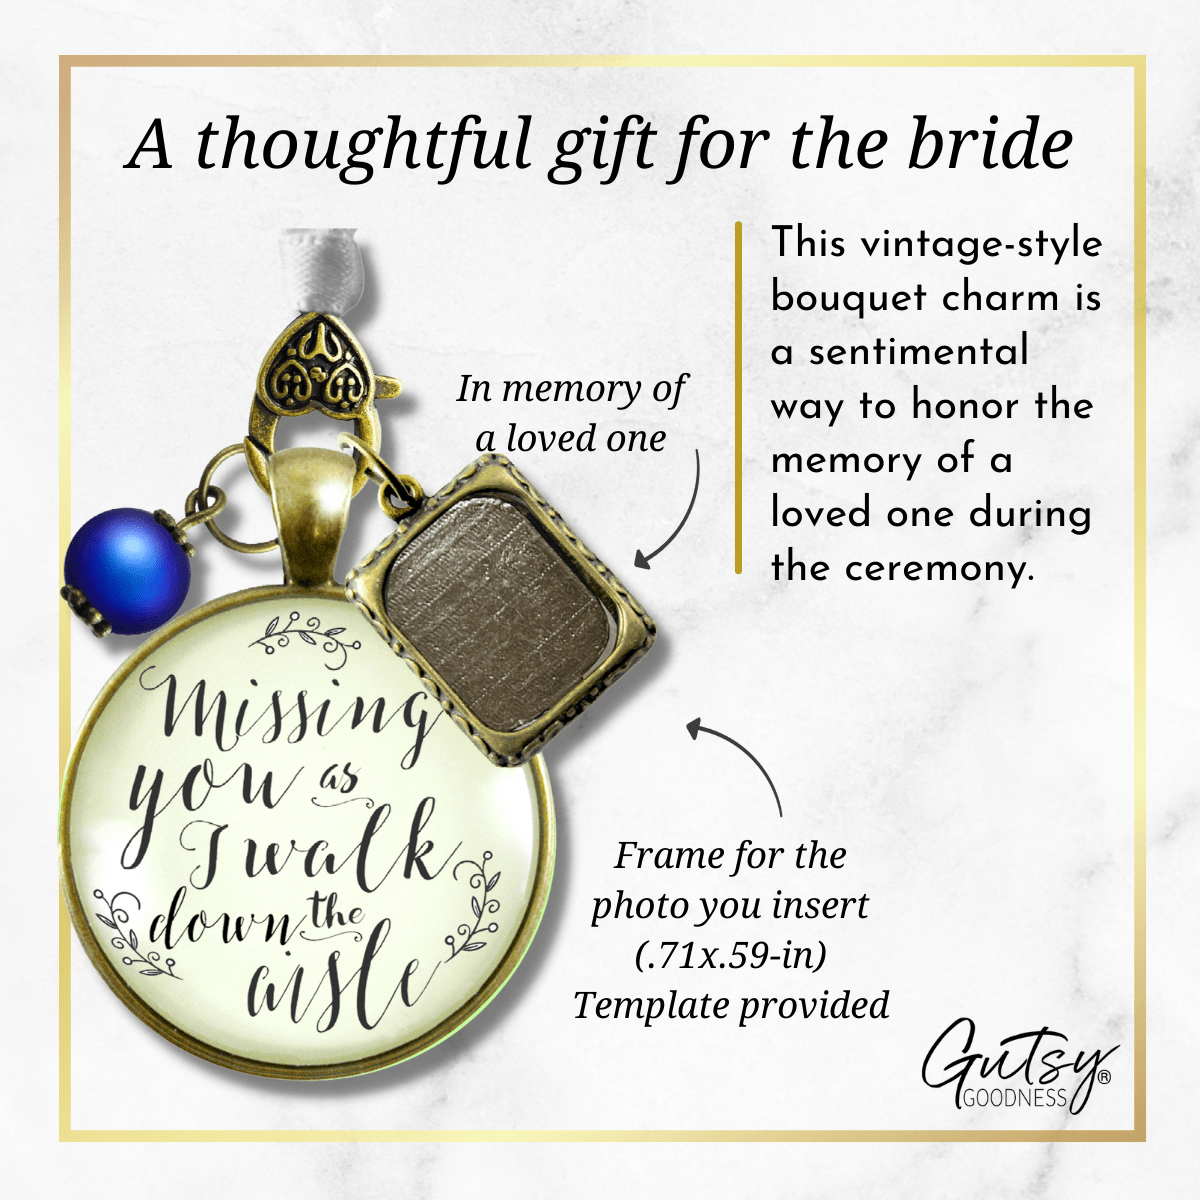 Missing You As I Walk Down The Aisle Wedding Bouquet Memory Memorial Blue Bead Frame - Gutsy Goodness Handmade Jewelry Gifts